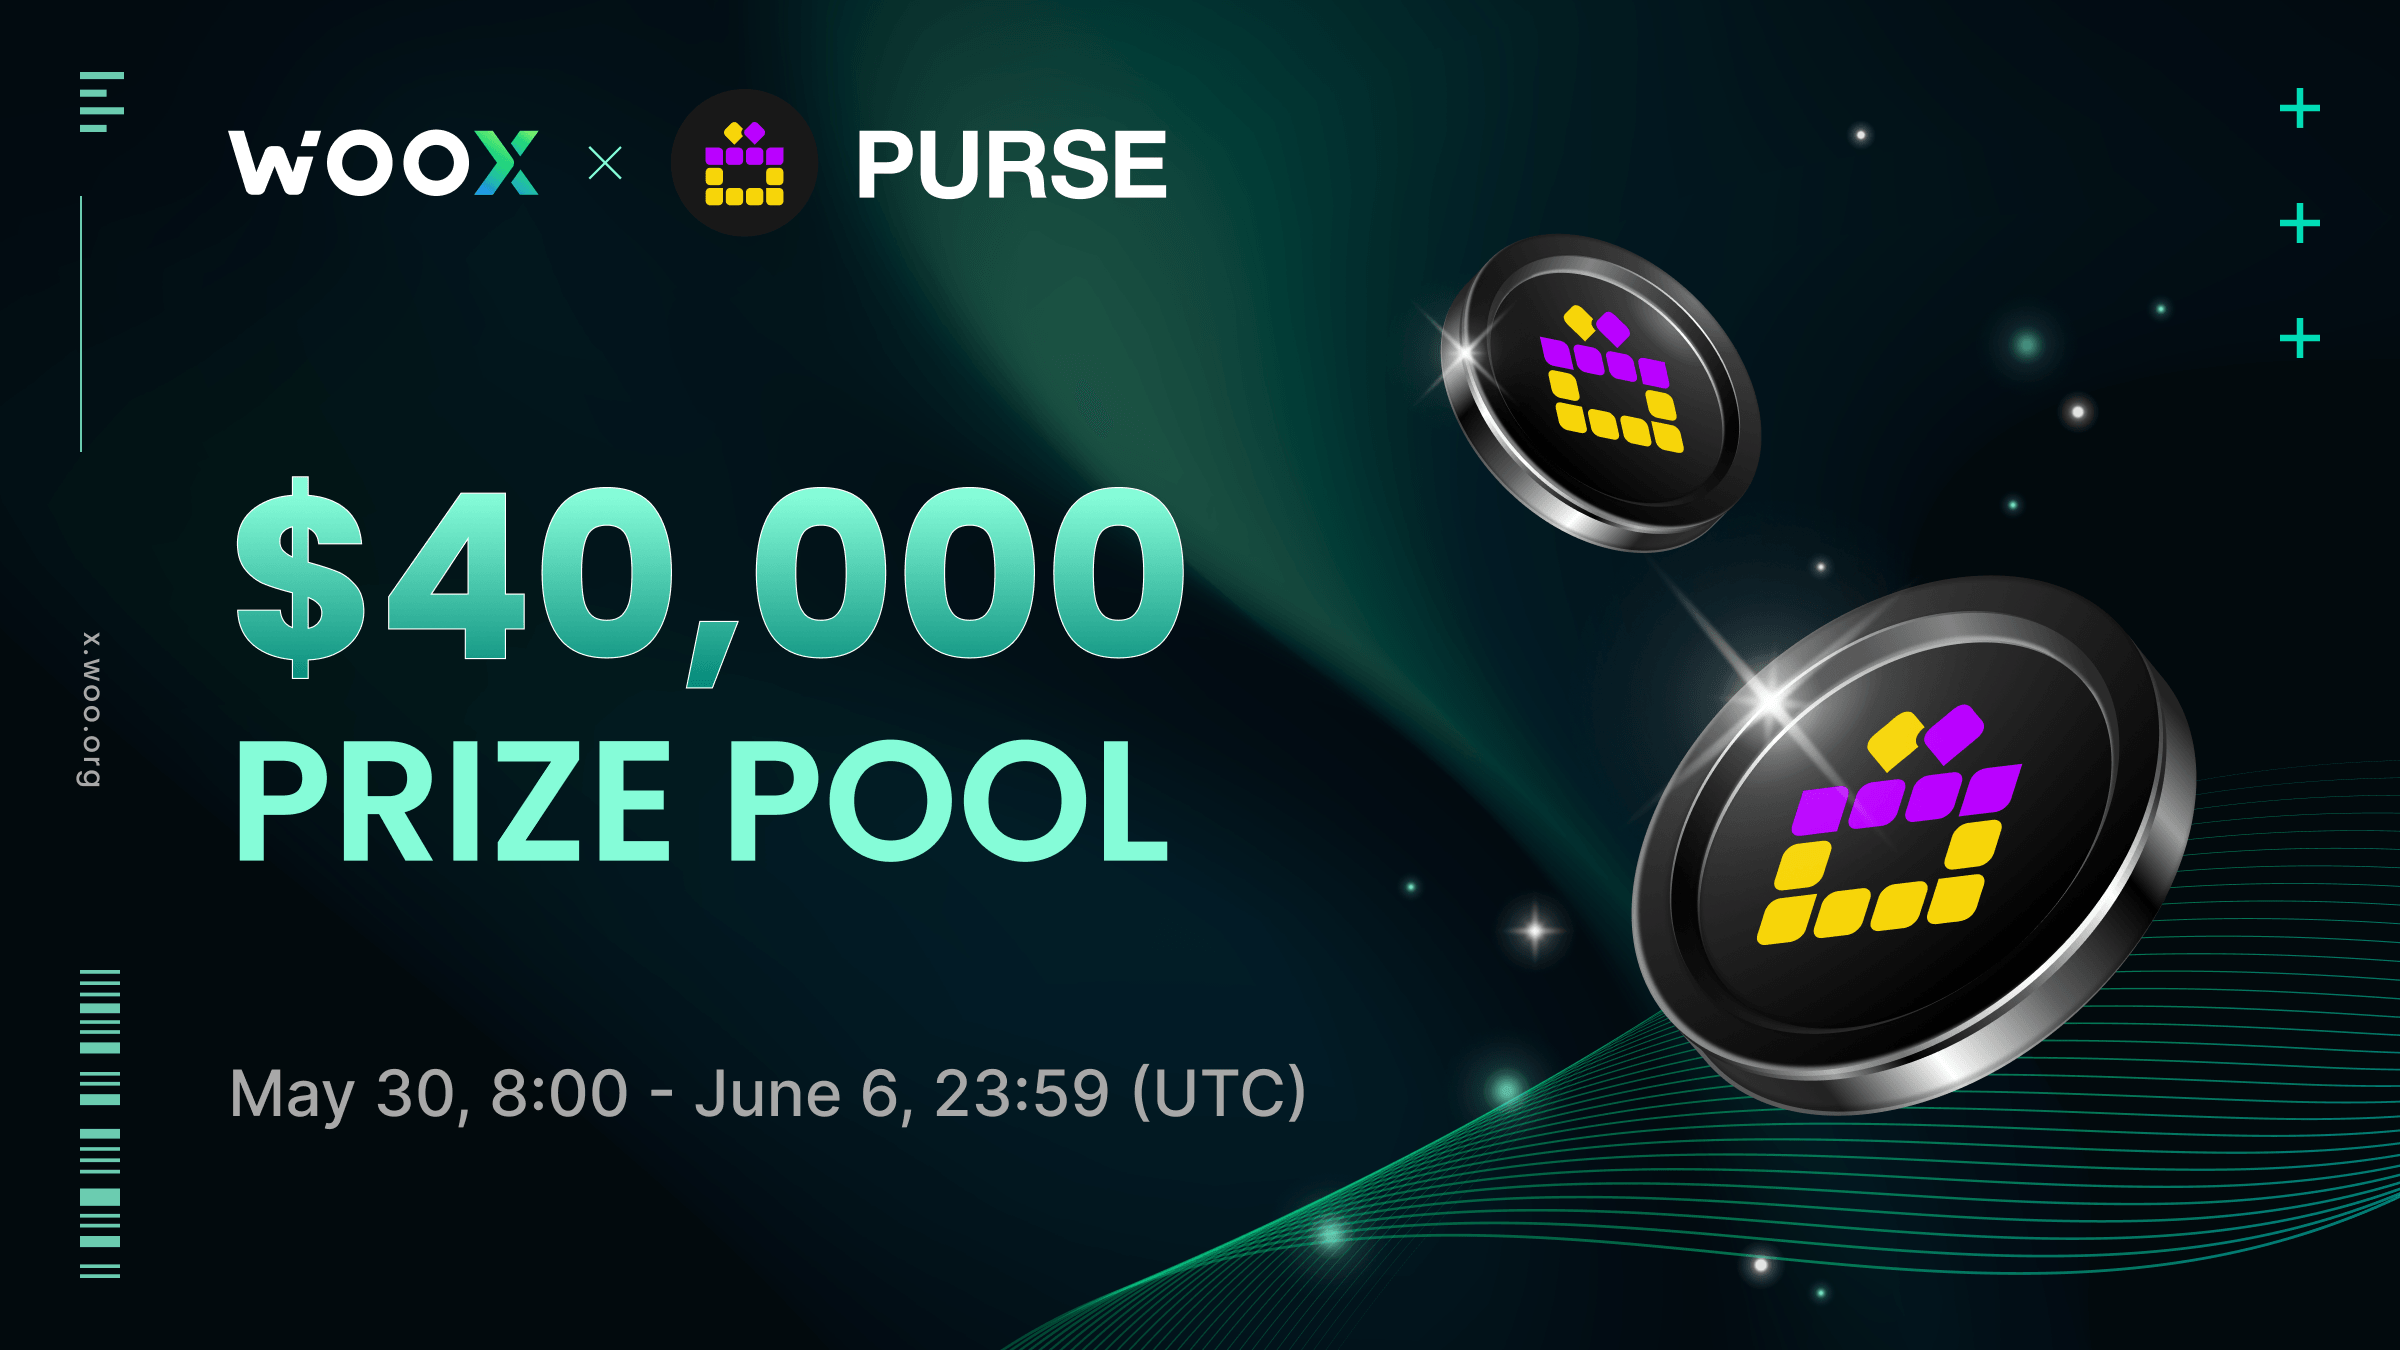 Dive into our trading event for a $40,000 PURSE prize pool!